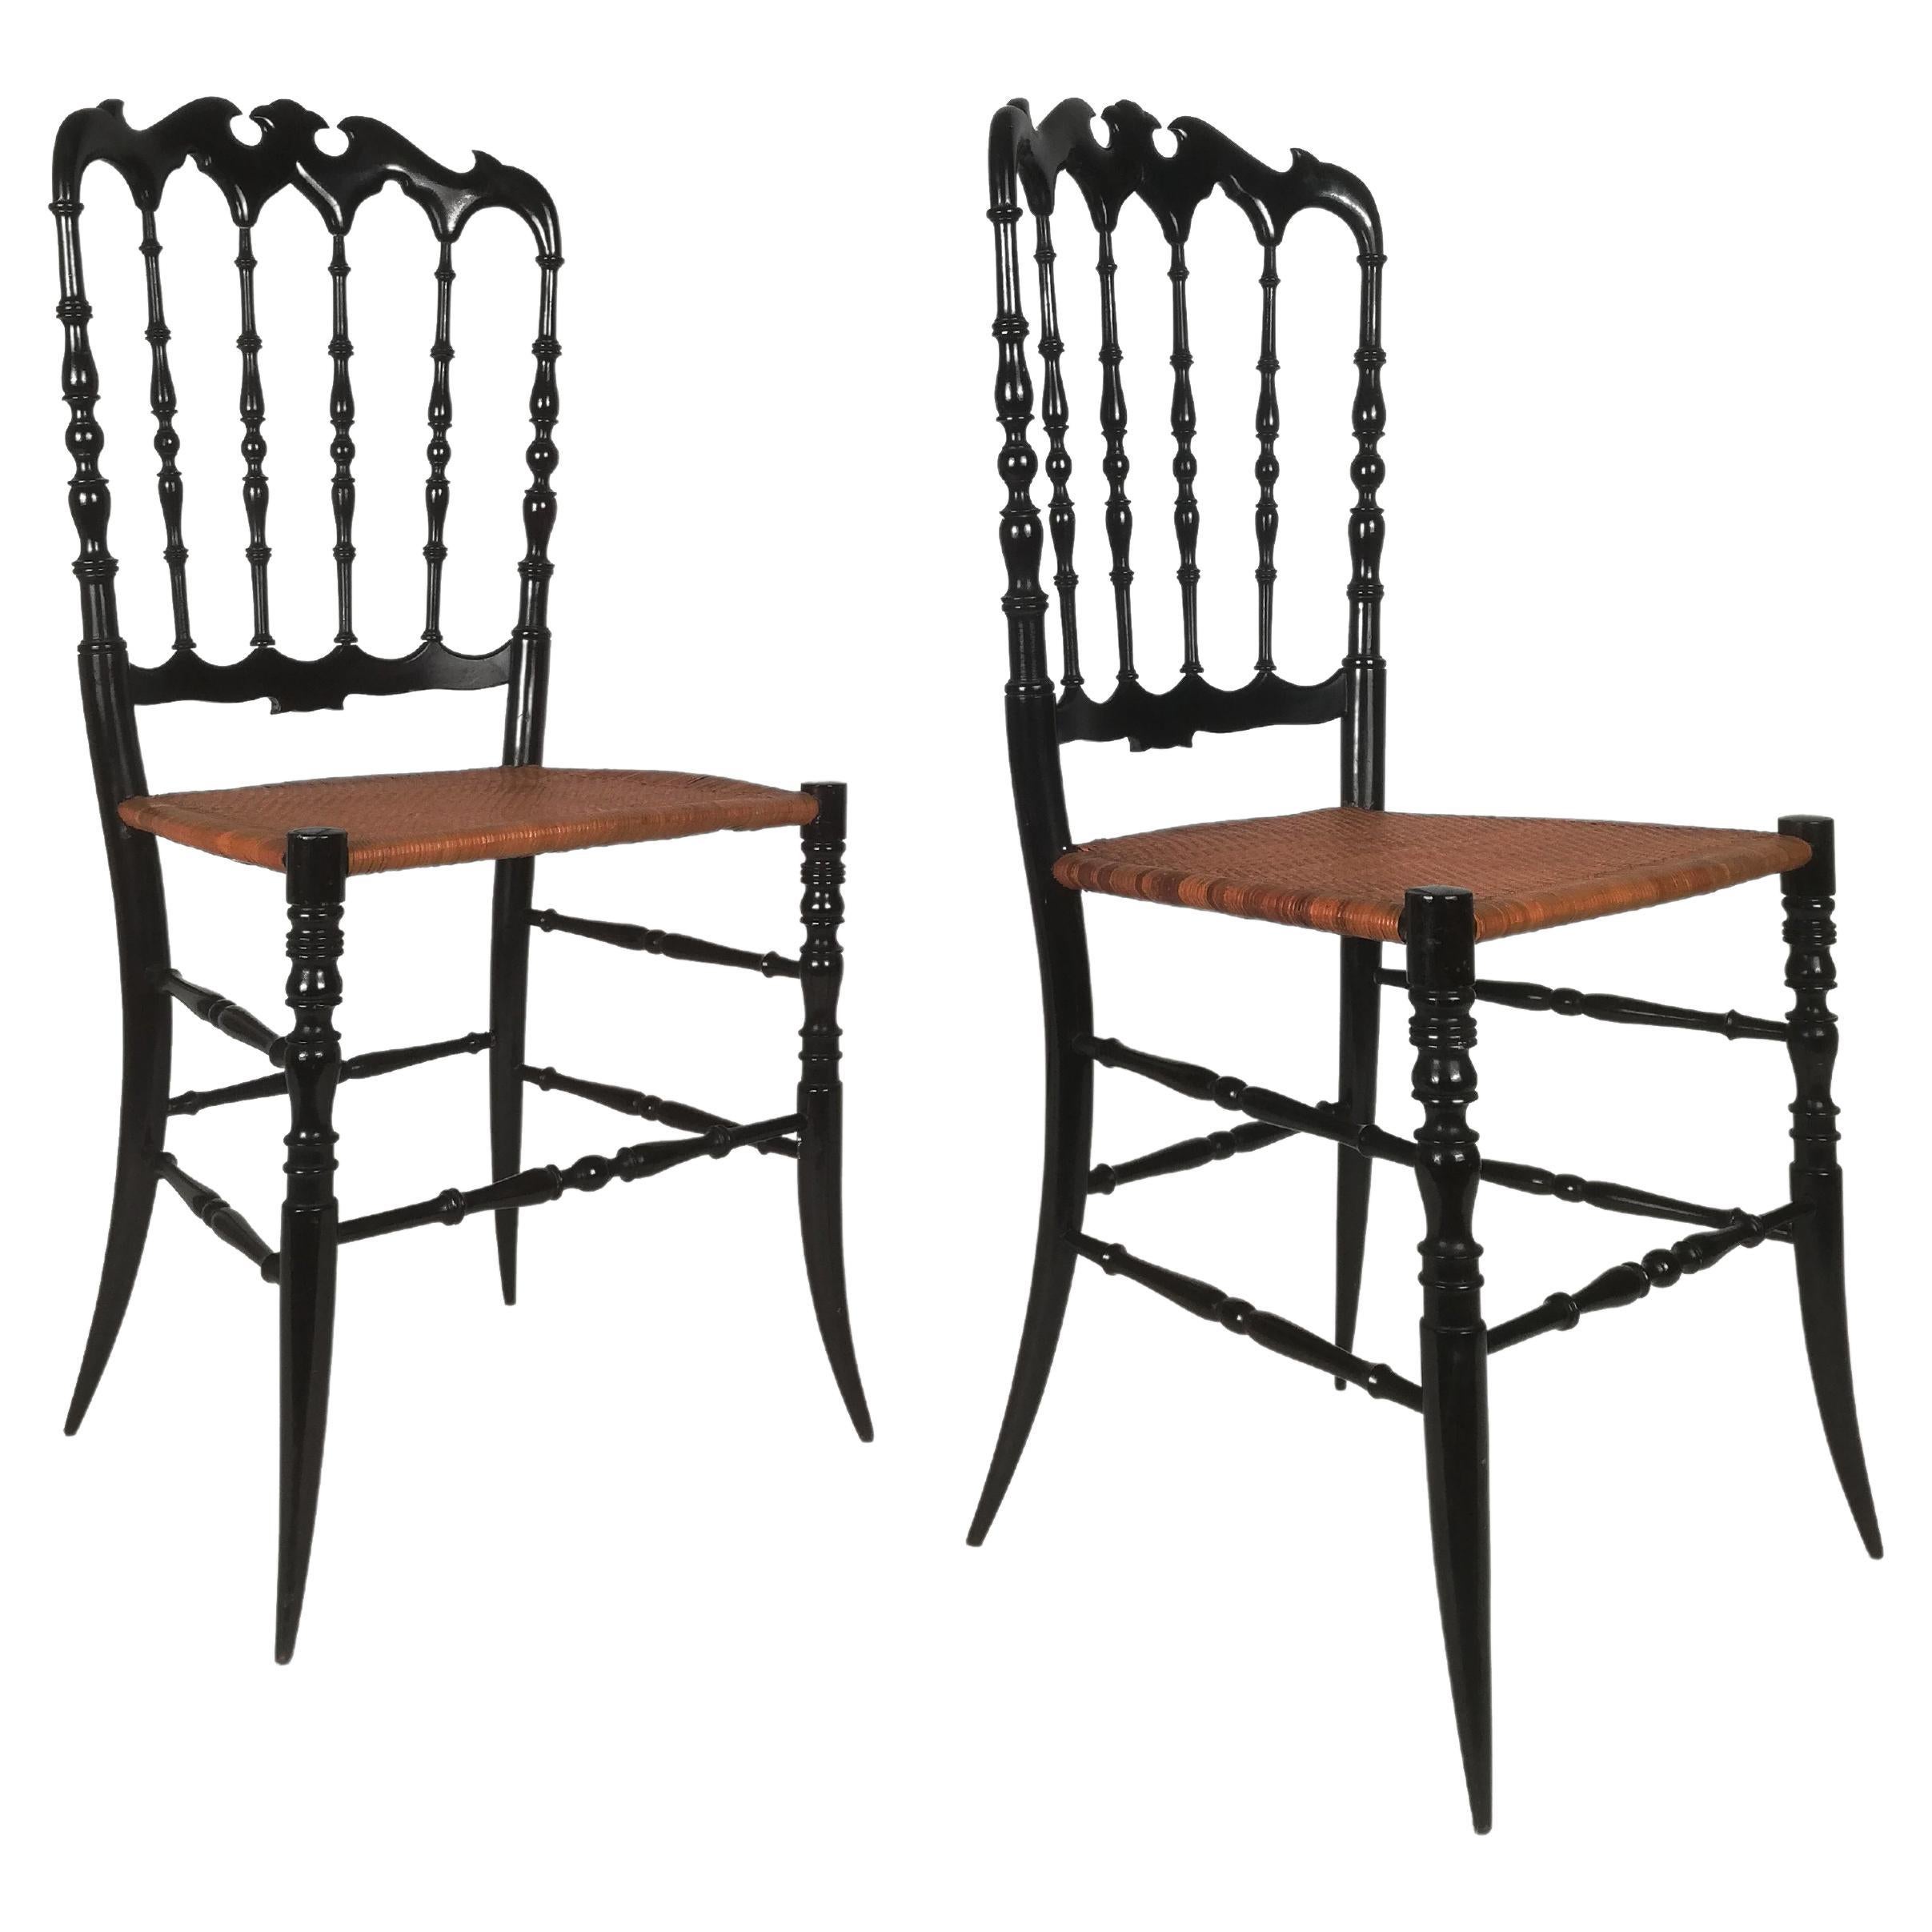 Pair of Chiavarine Chairs Parisian Serie, in Super Light Black Wood and Straw